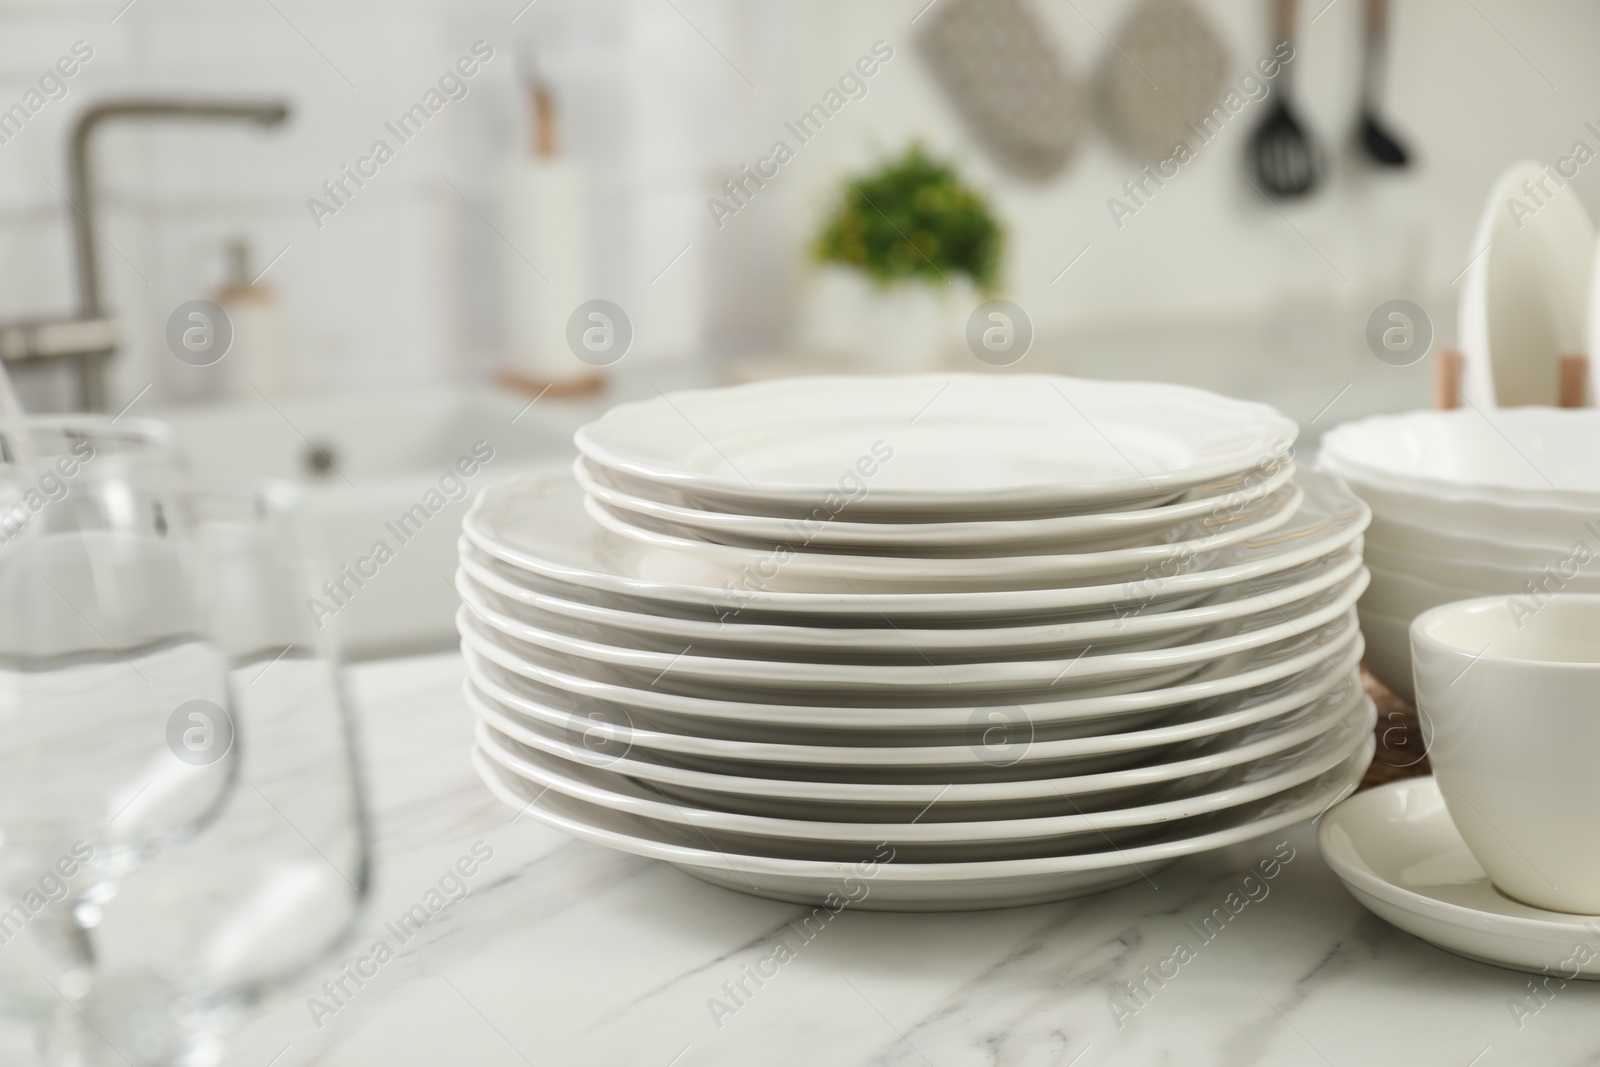 Photo of Clean plates and cup on white marble countertop in kitchen